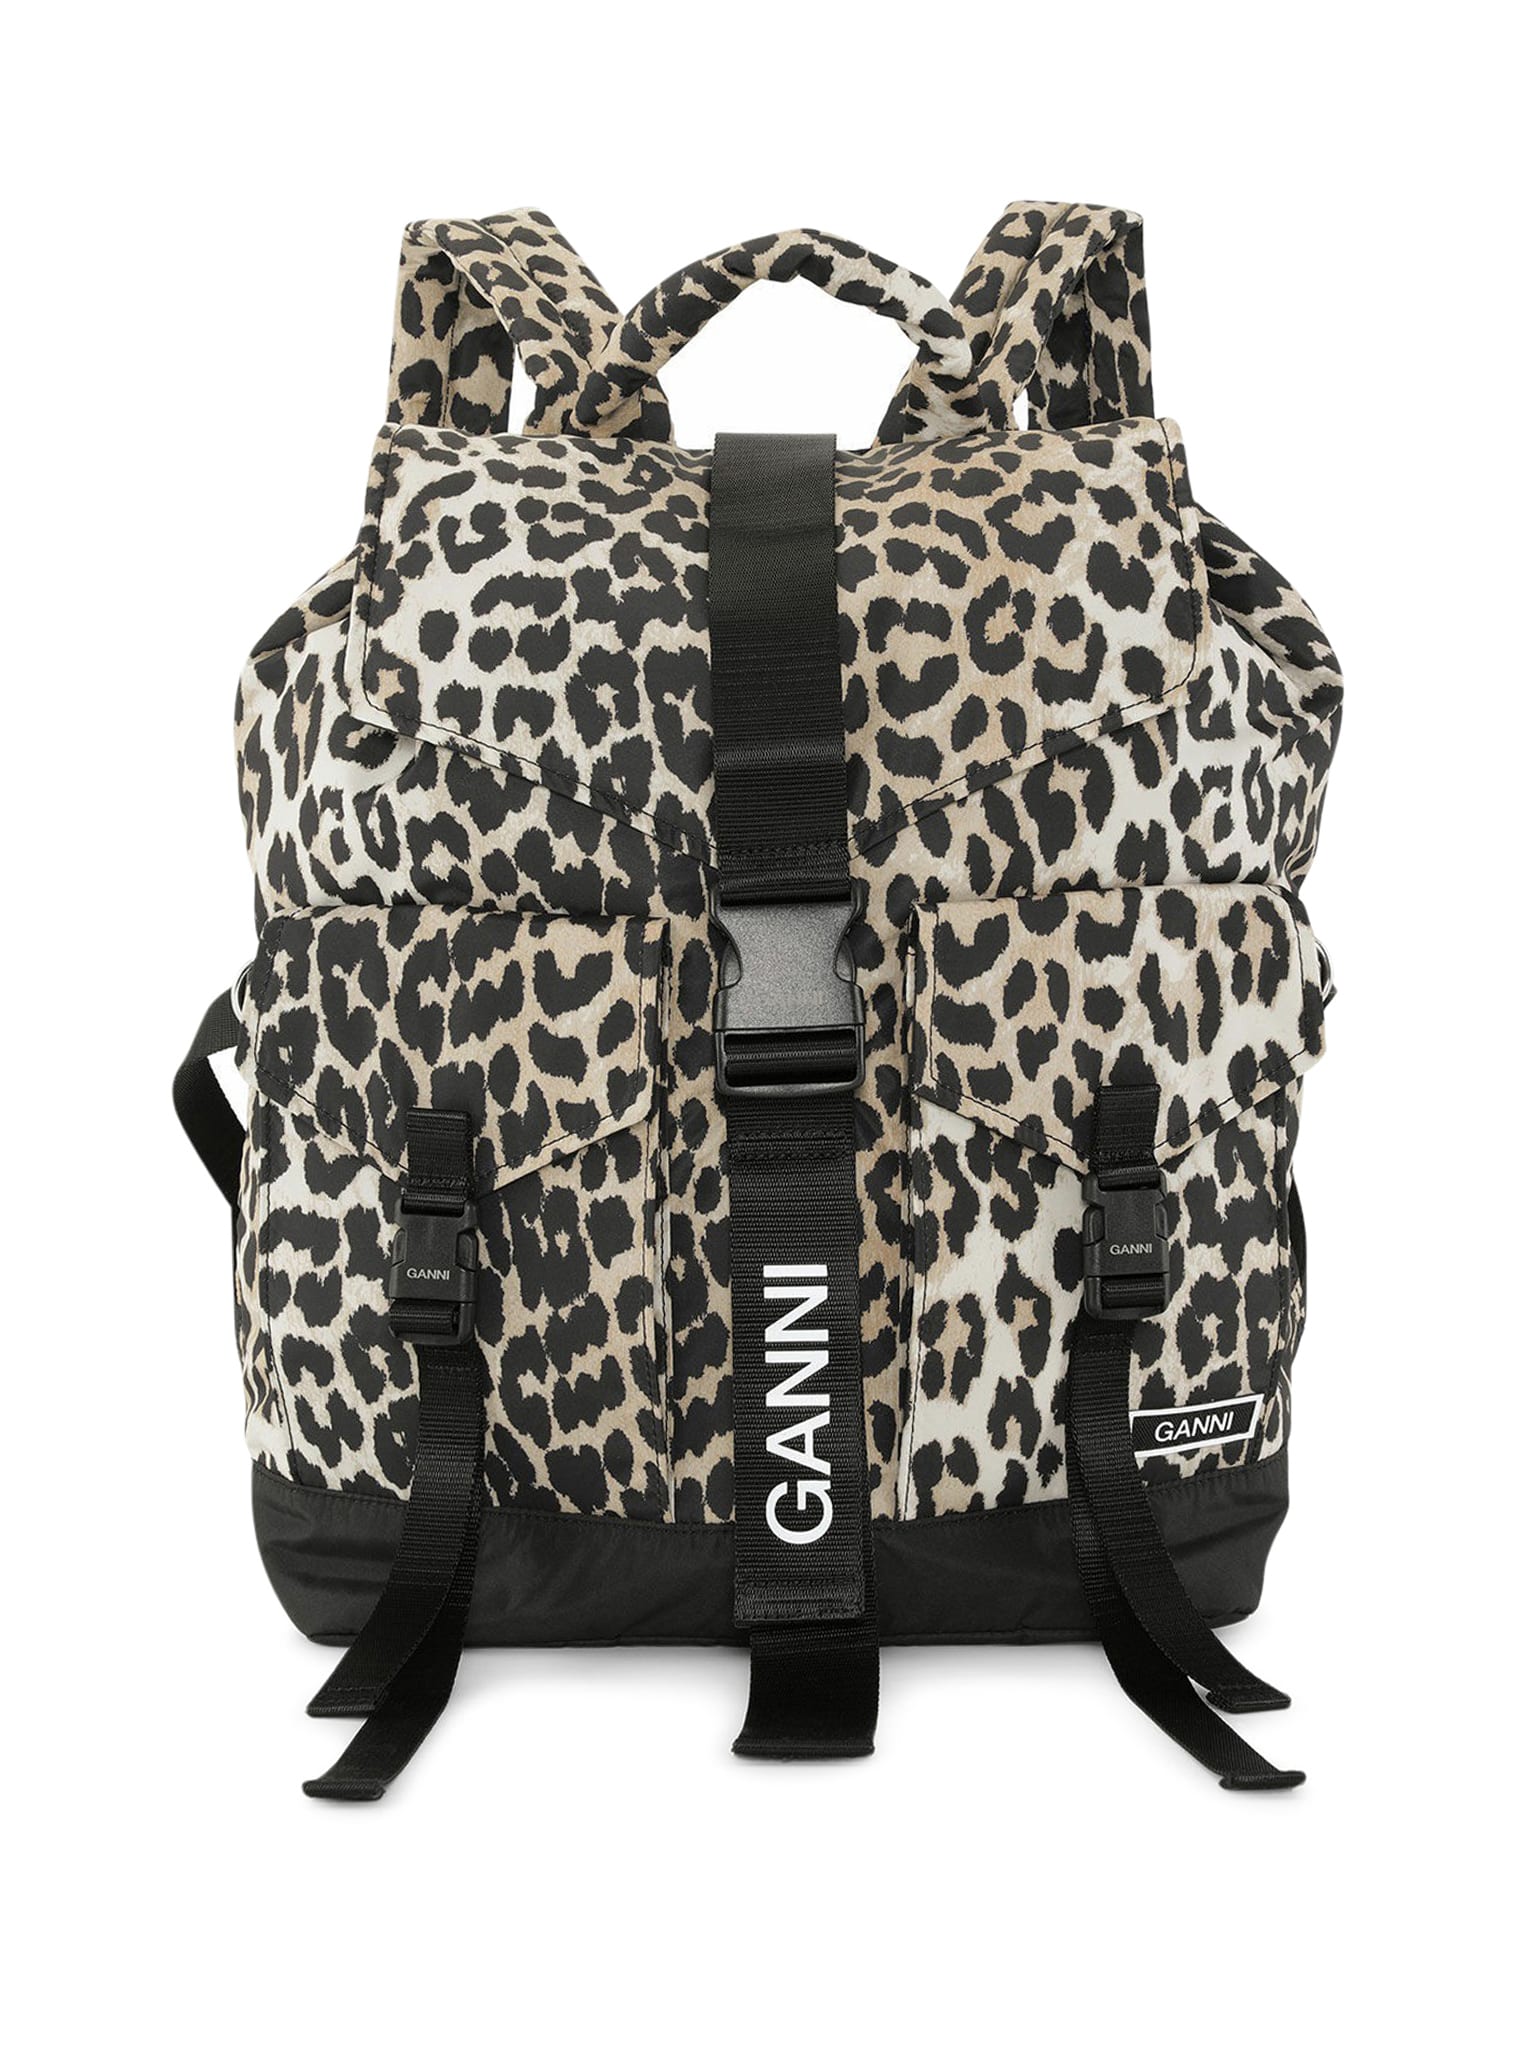 GANNI RECYCLED TECH BACKPACK PRINT